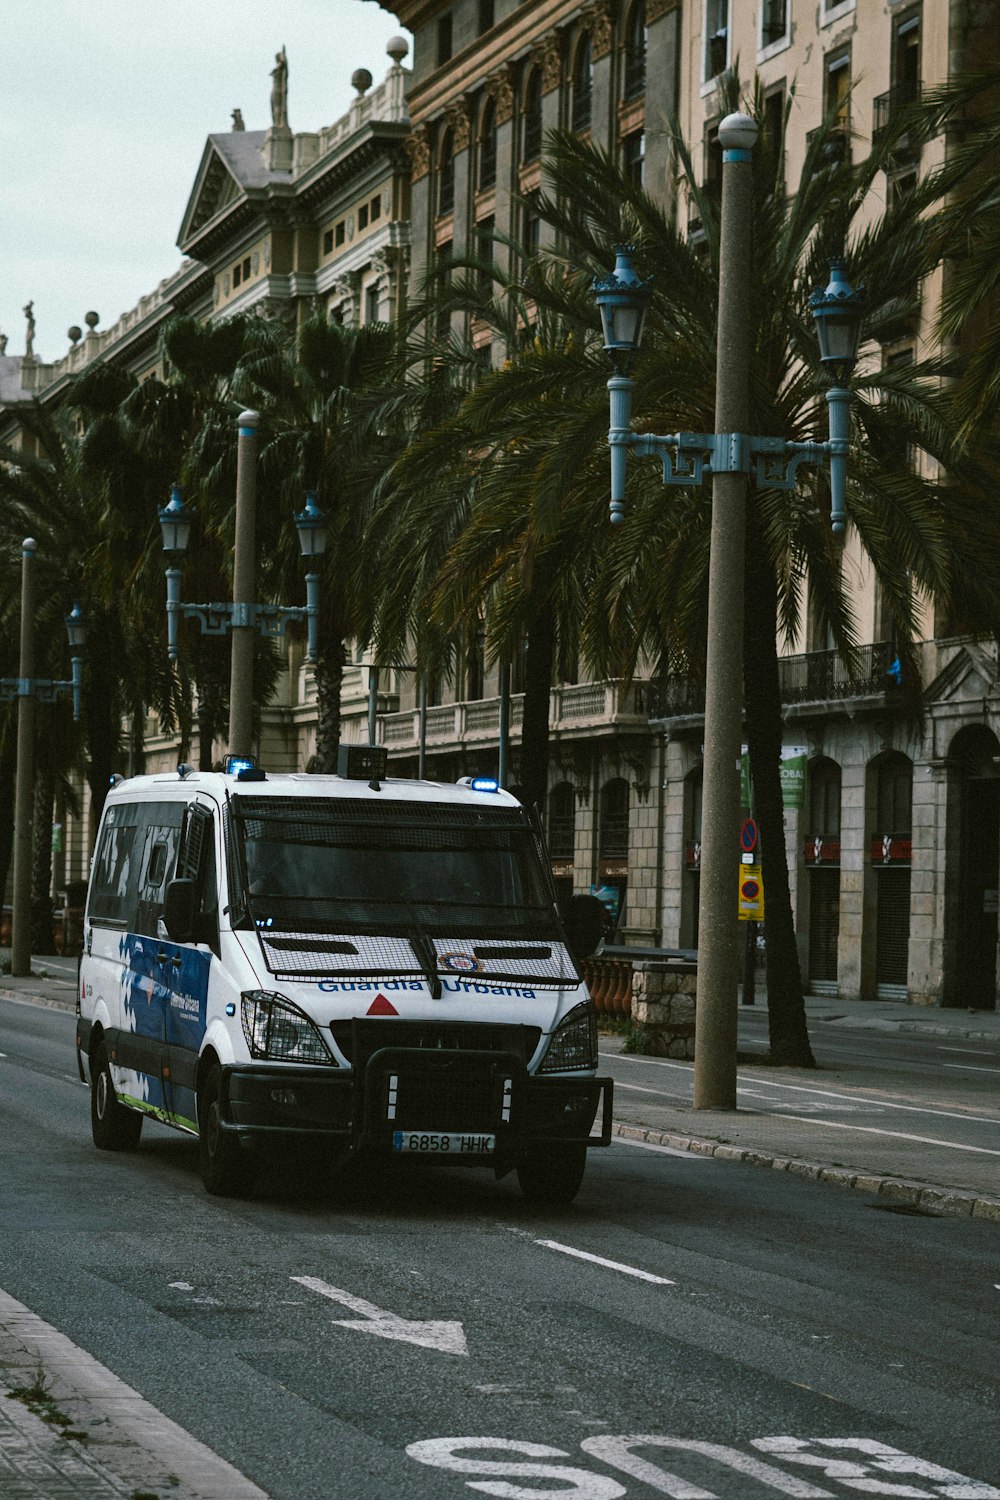 a police van driving down a street next to palm trees